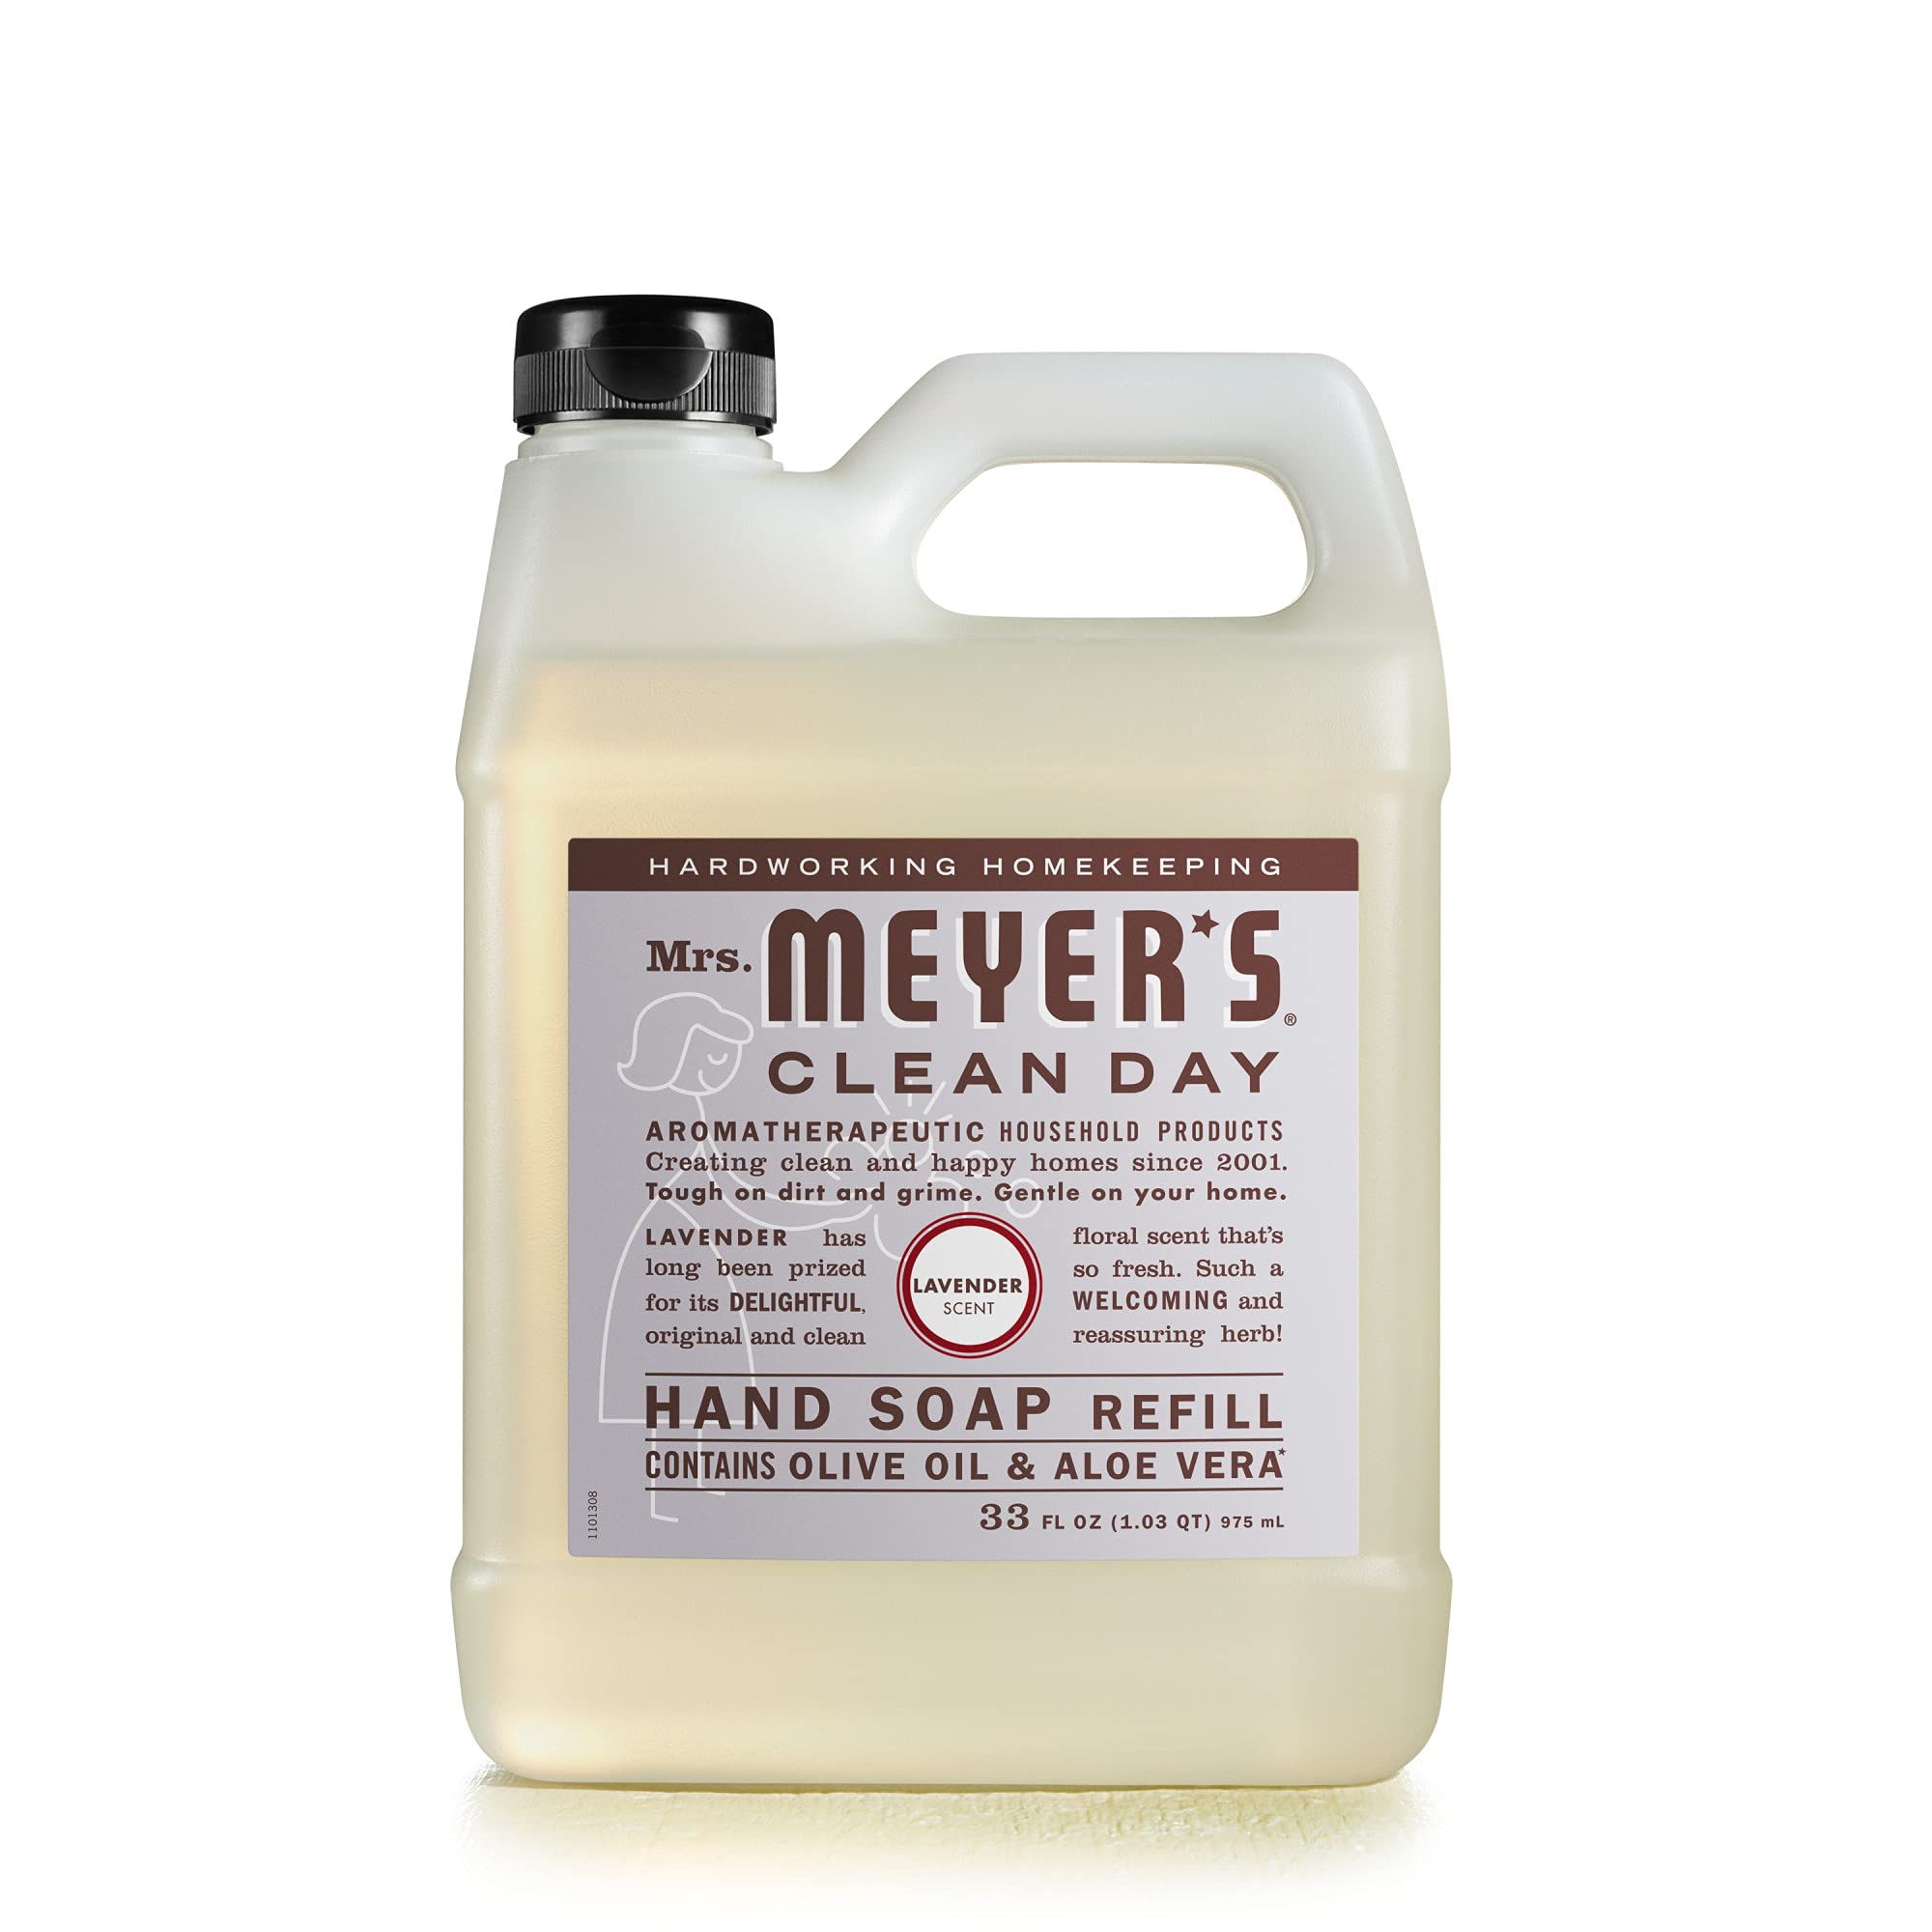 33-Oz Mrs. Meyer's Hand Soap Refill (Lavender) $4.41 w/ S&S + Free Shipping w/ Prime or on orders over $35